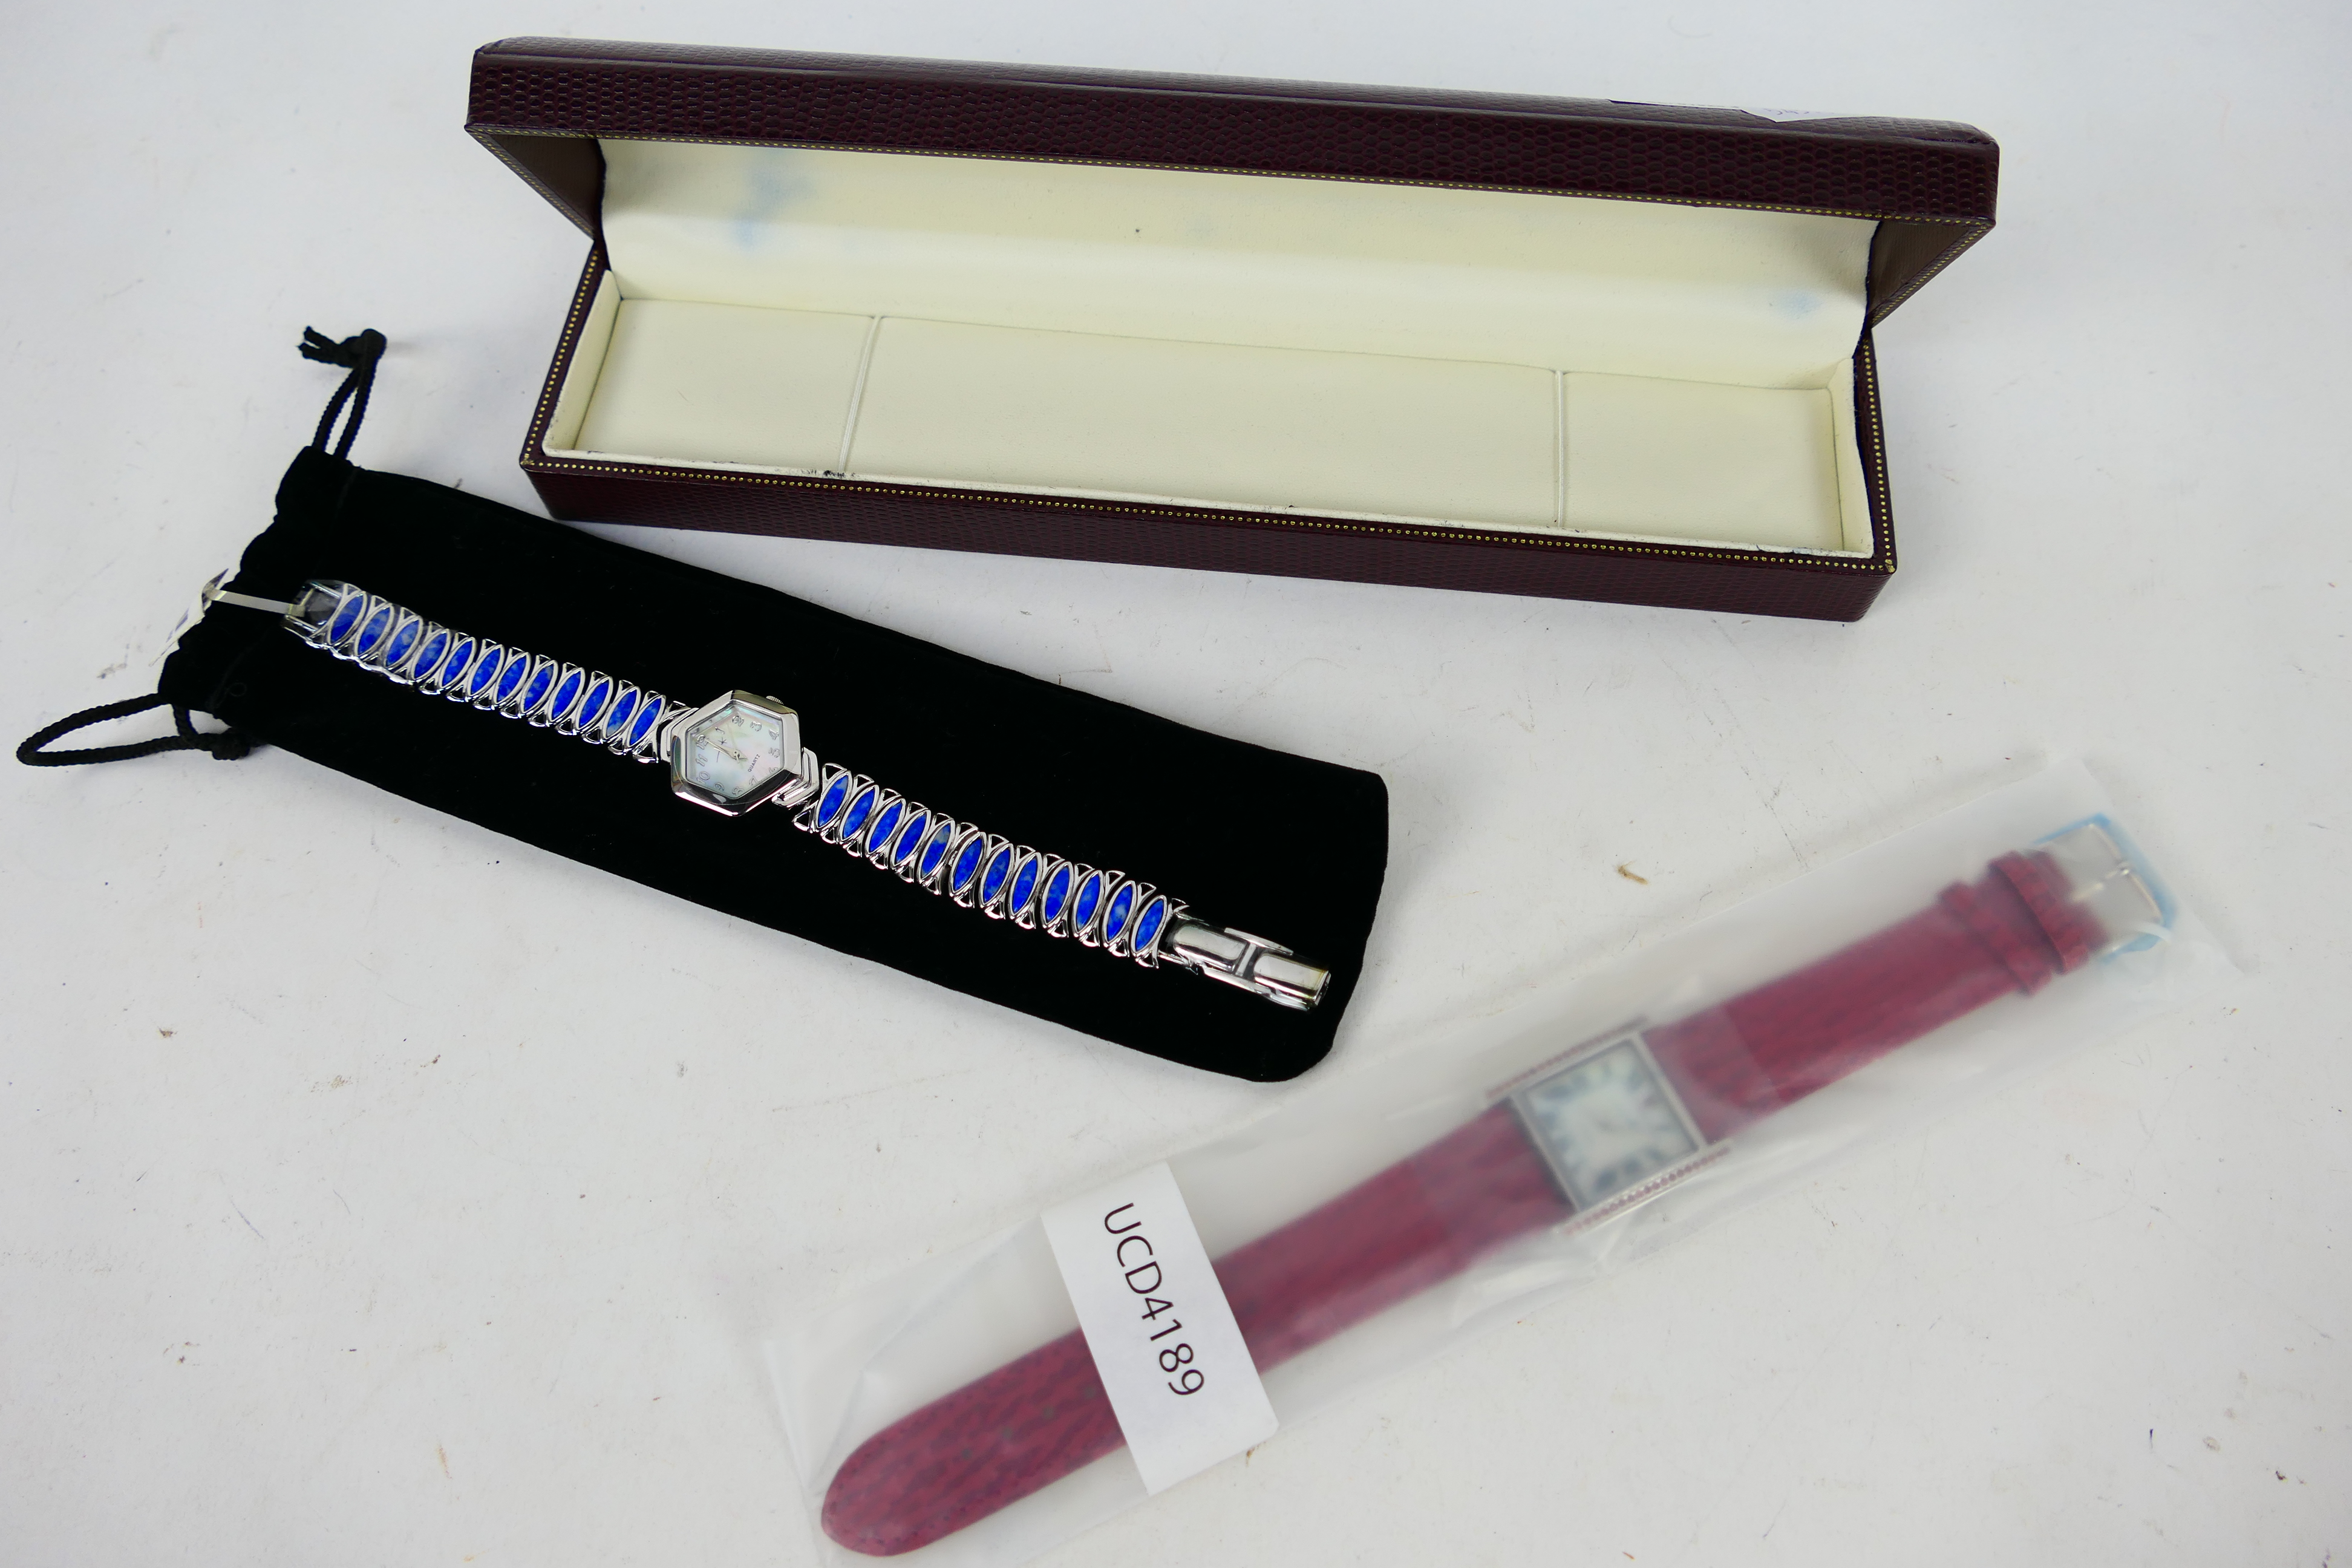 Unused Shop Stock - Two wrist watches including one with silver case.